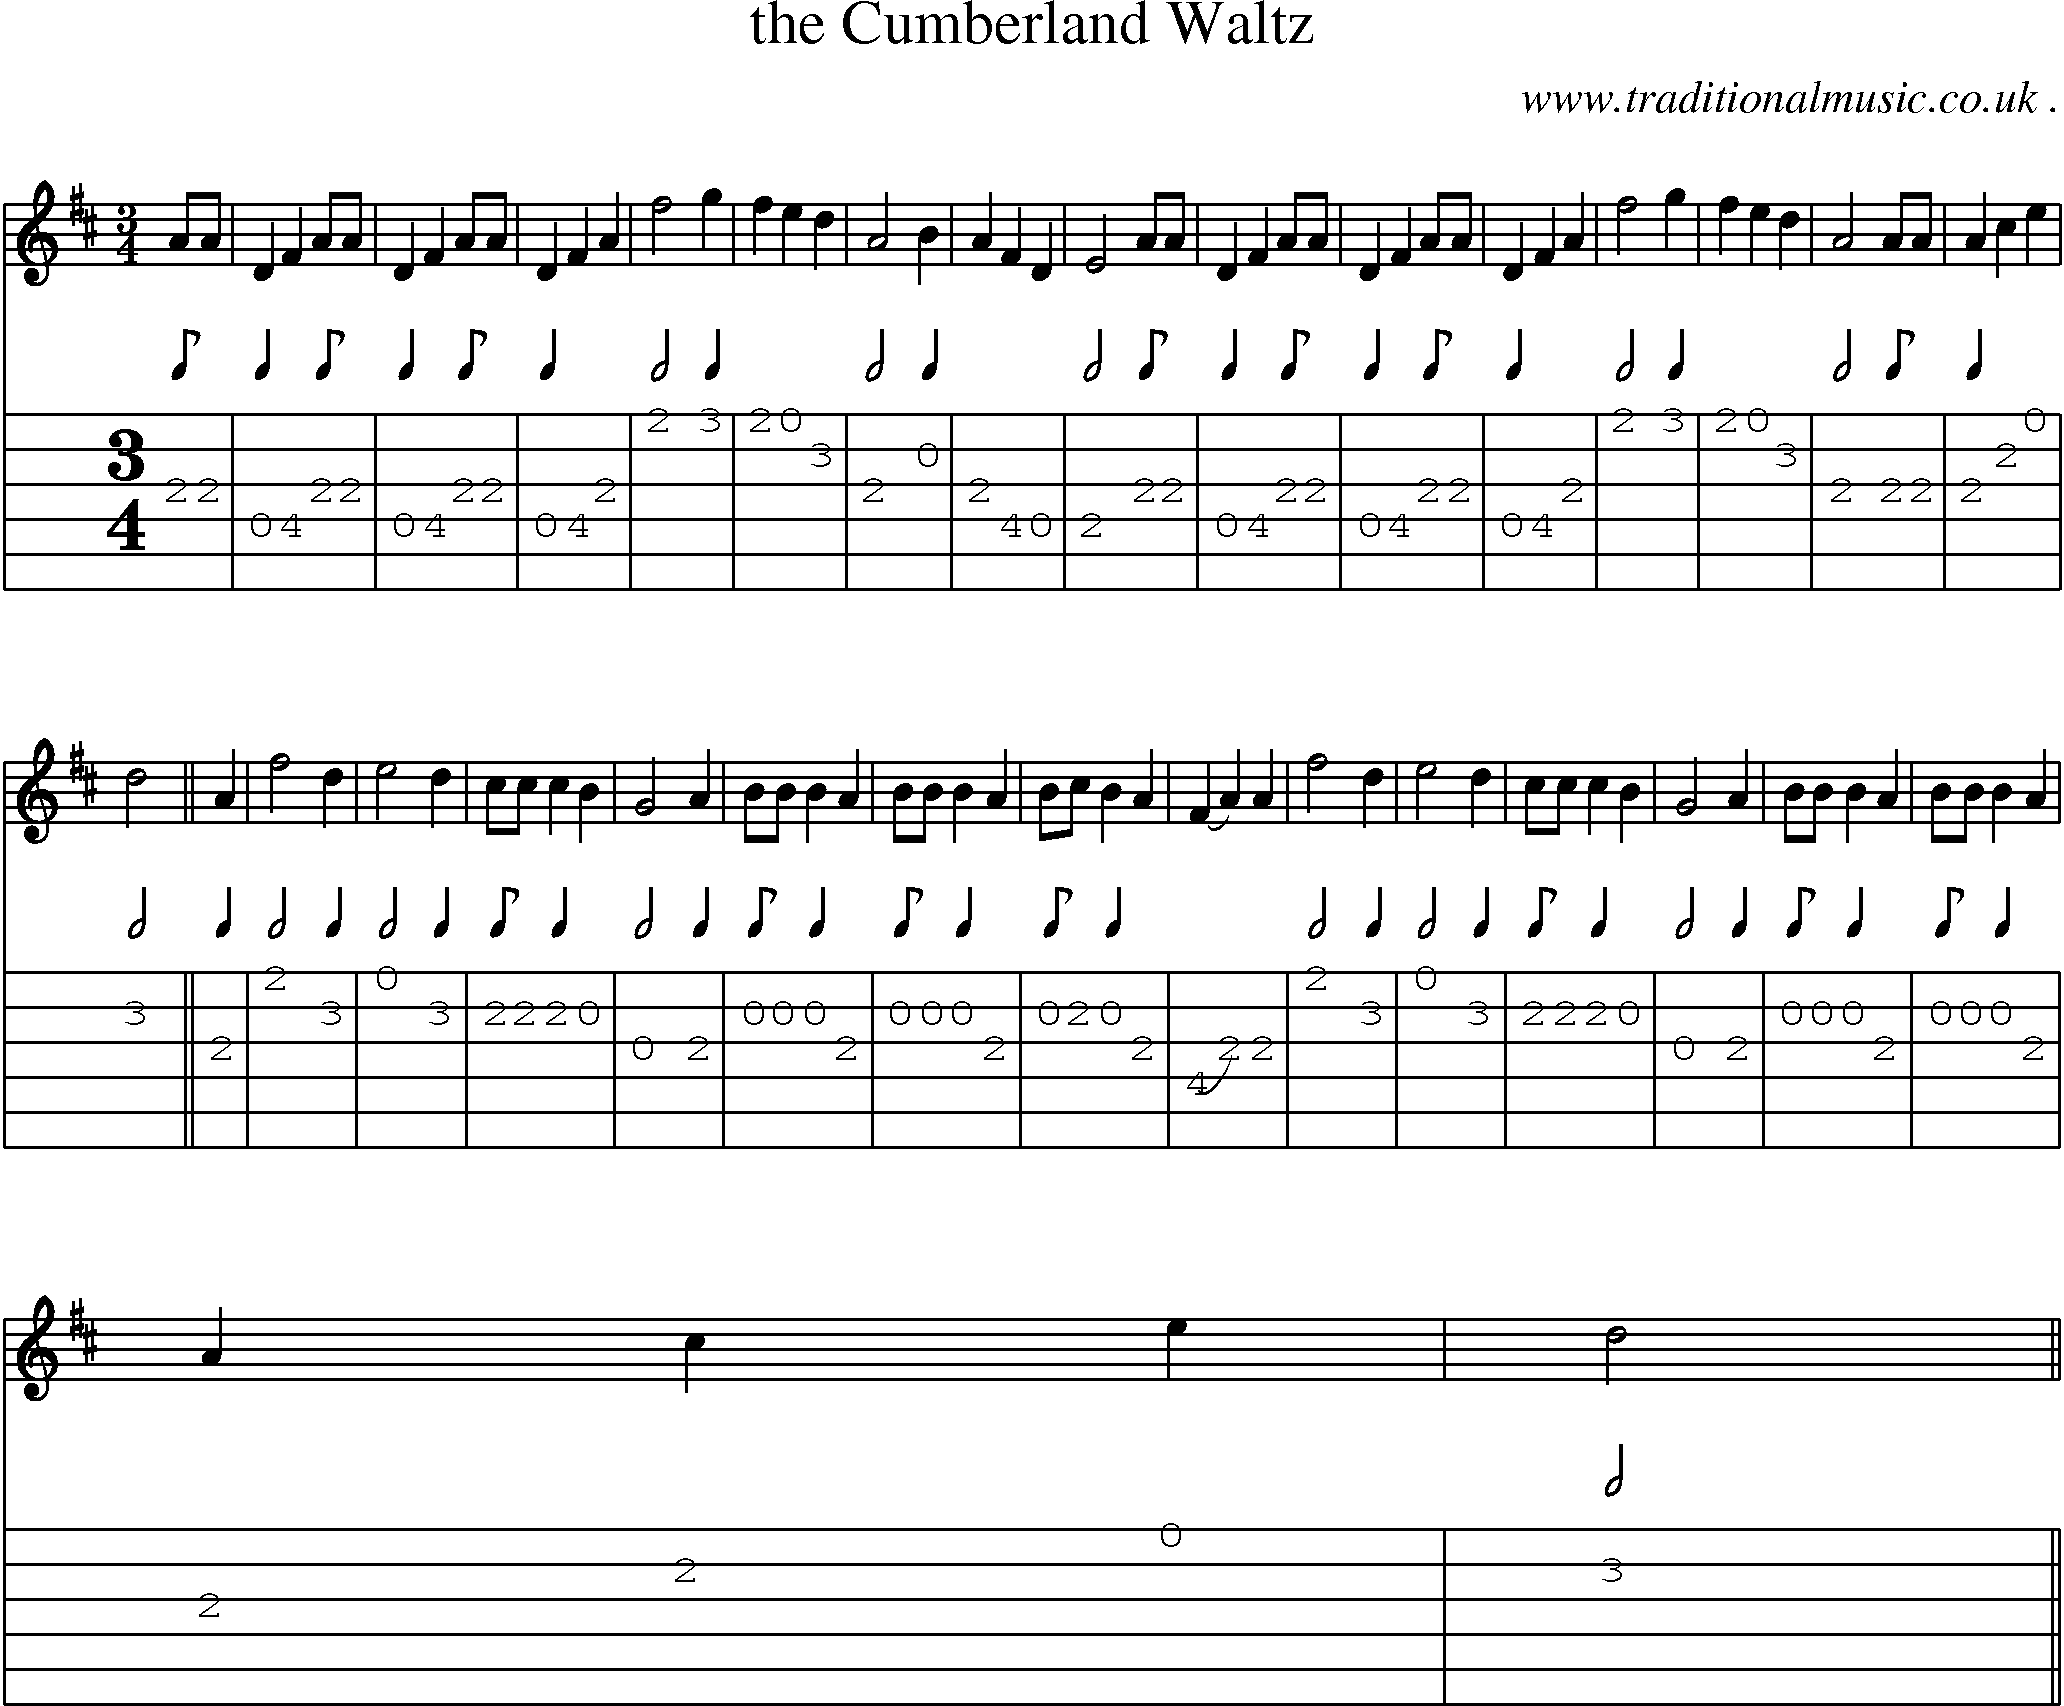 Sheet-Music and Guitar Tabs for The Cumberland Waltz